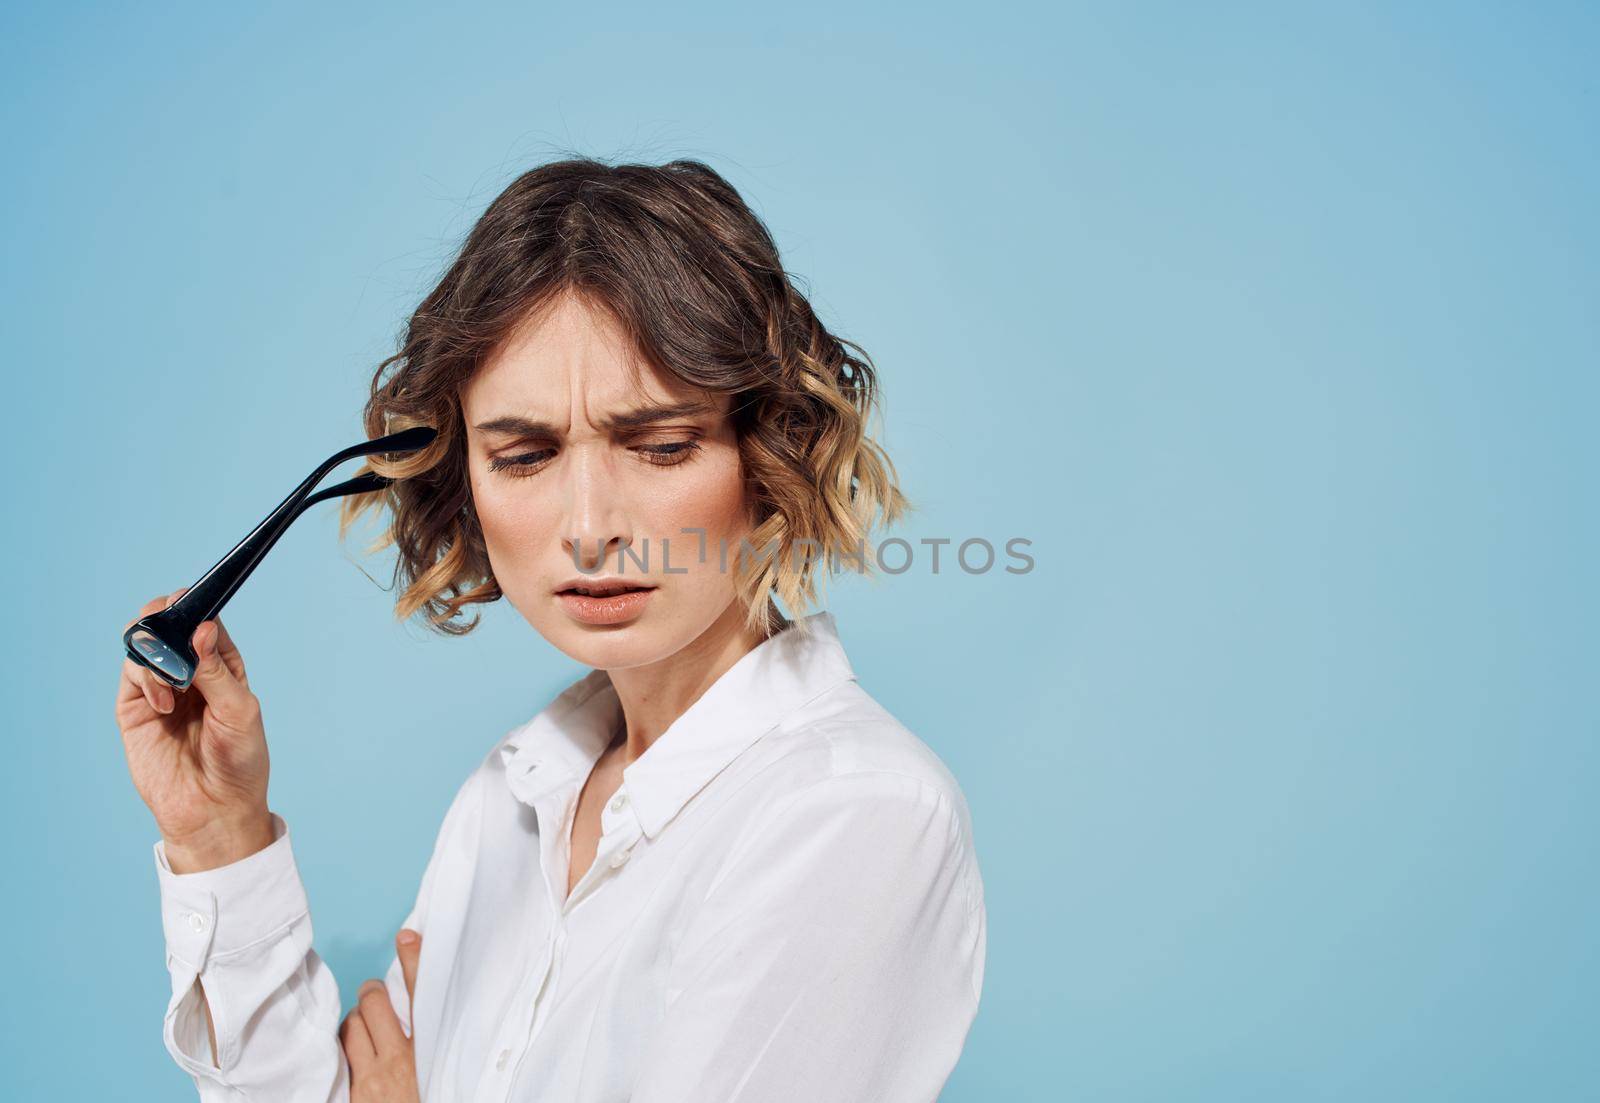 Fashionable woman in a light shirt with glasses in her hands on a blue background by SHOTPRIME